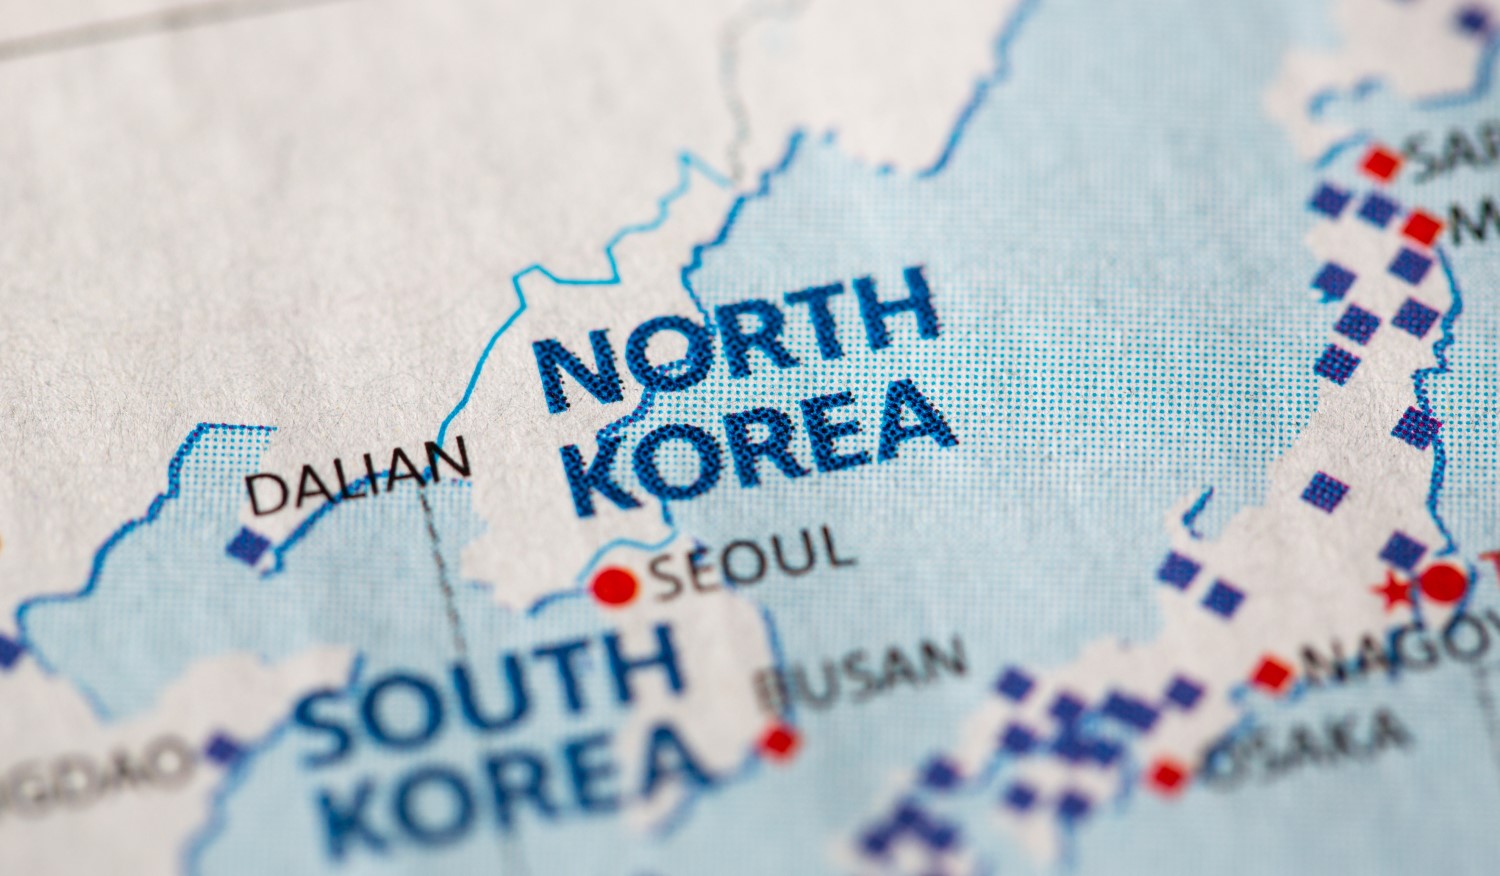 North Korea Plans Bitcoin-Like Cryptocurrency To Sidestep Sanctions